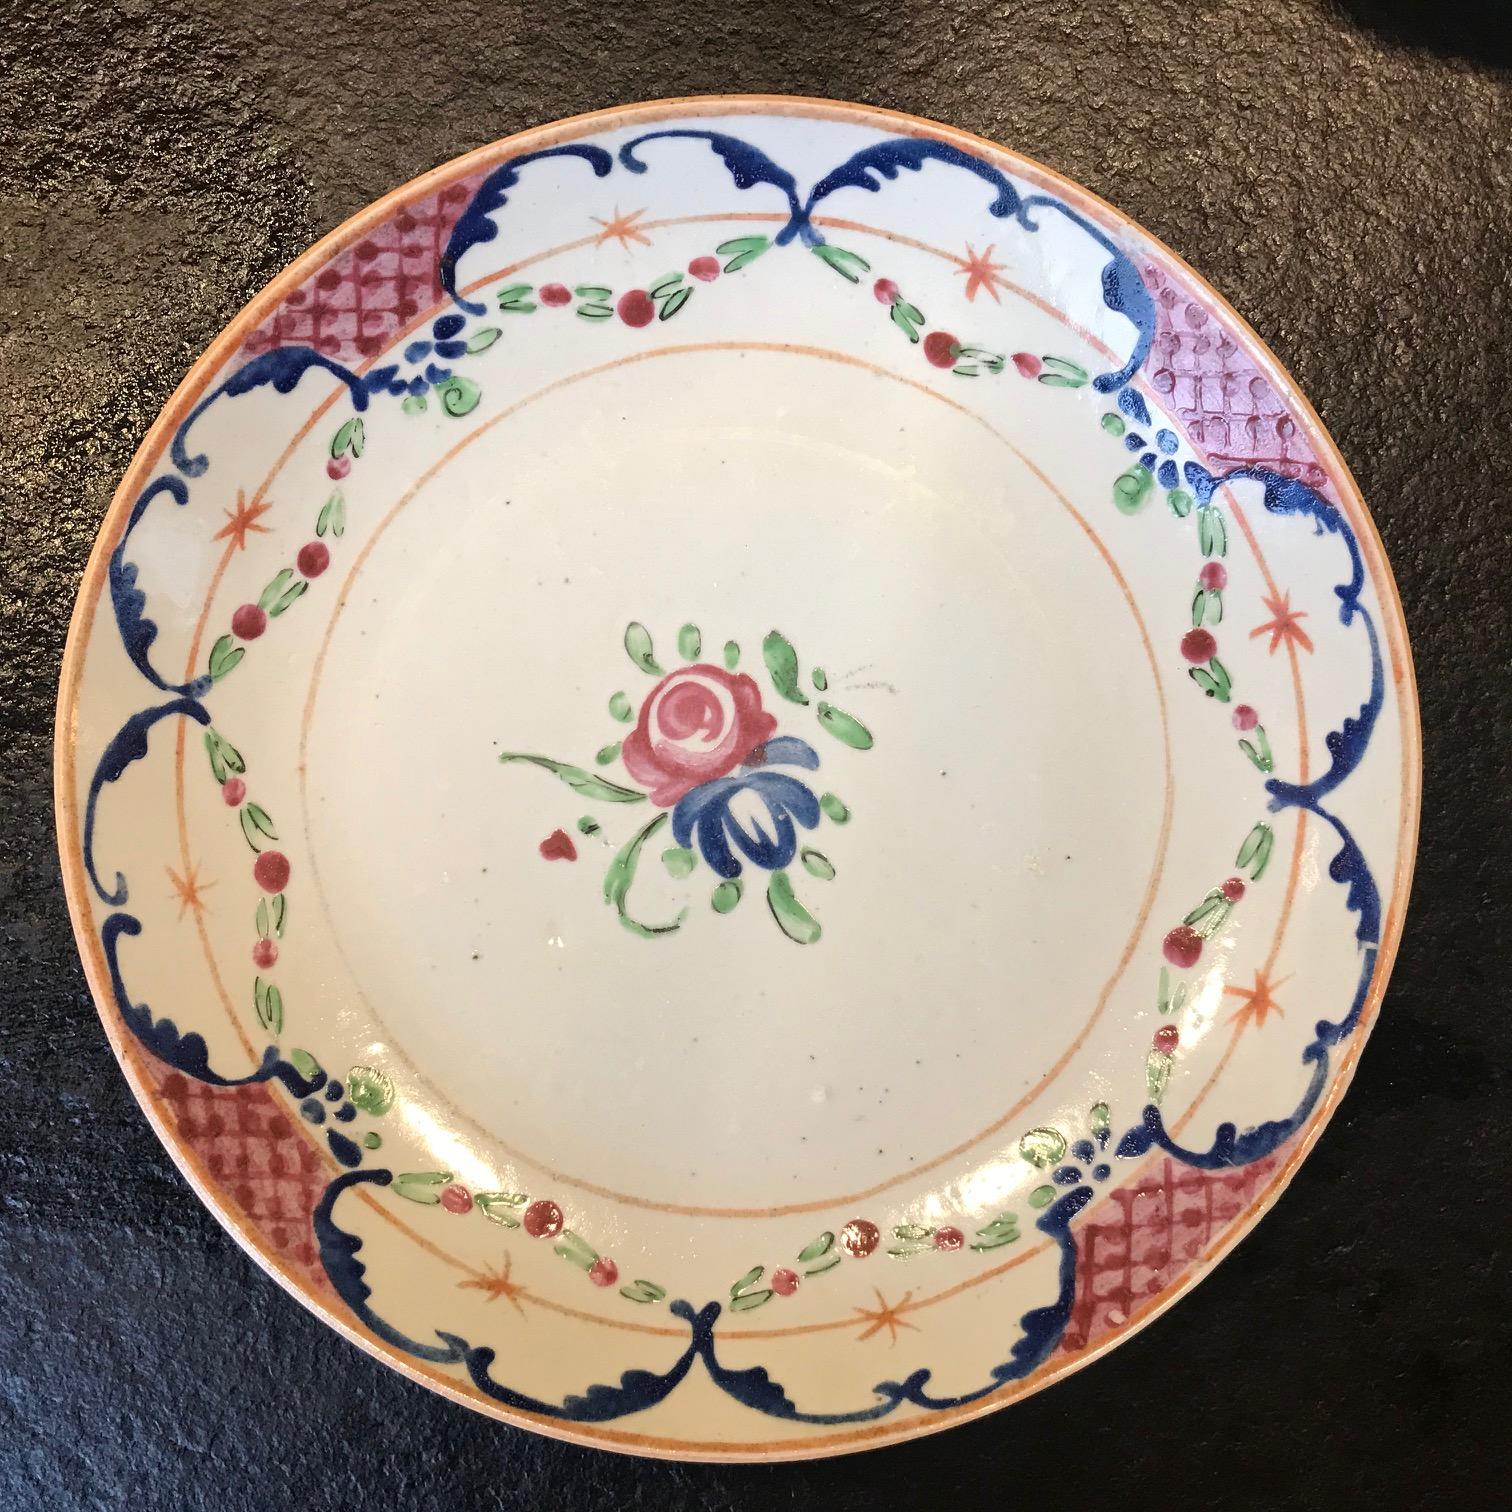 Dinner plates from Various Famille Rose Wares China, Qing dynasty, 18th century, from the Alberto Pinto collection, acquired in September 2017 from Christies Auction House in Paris. A total of 120 plates Composed by 42 plates (27cm diameter), nine